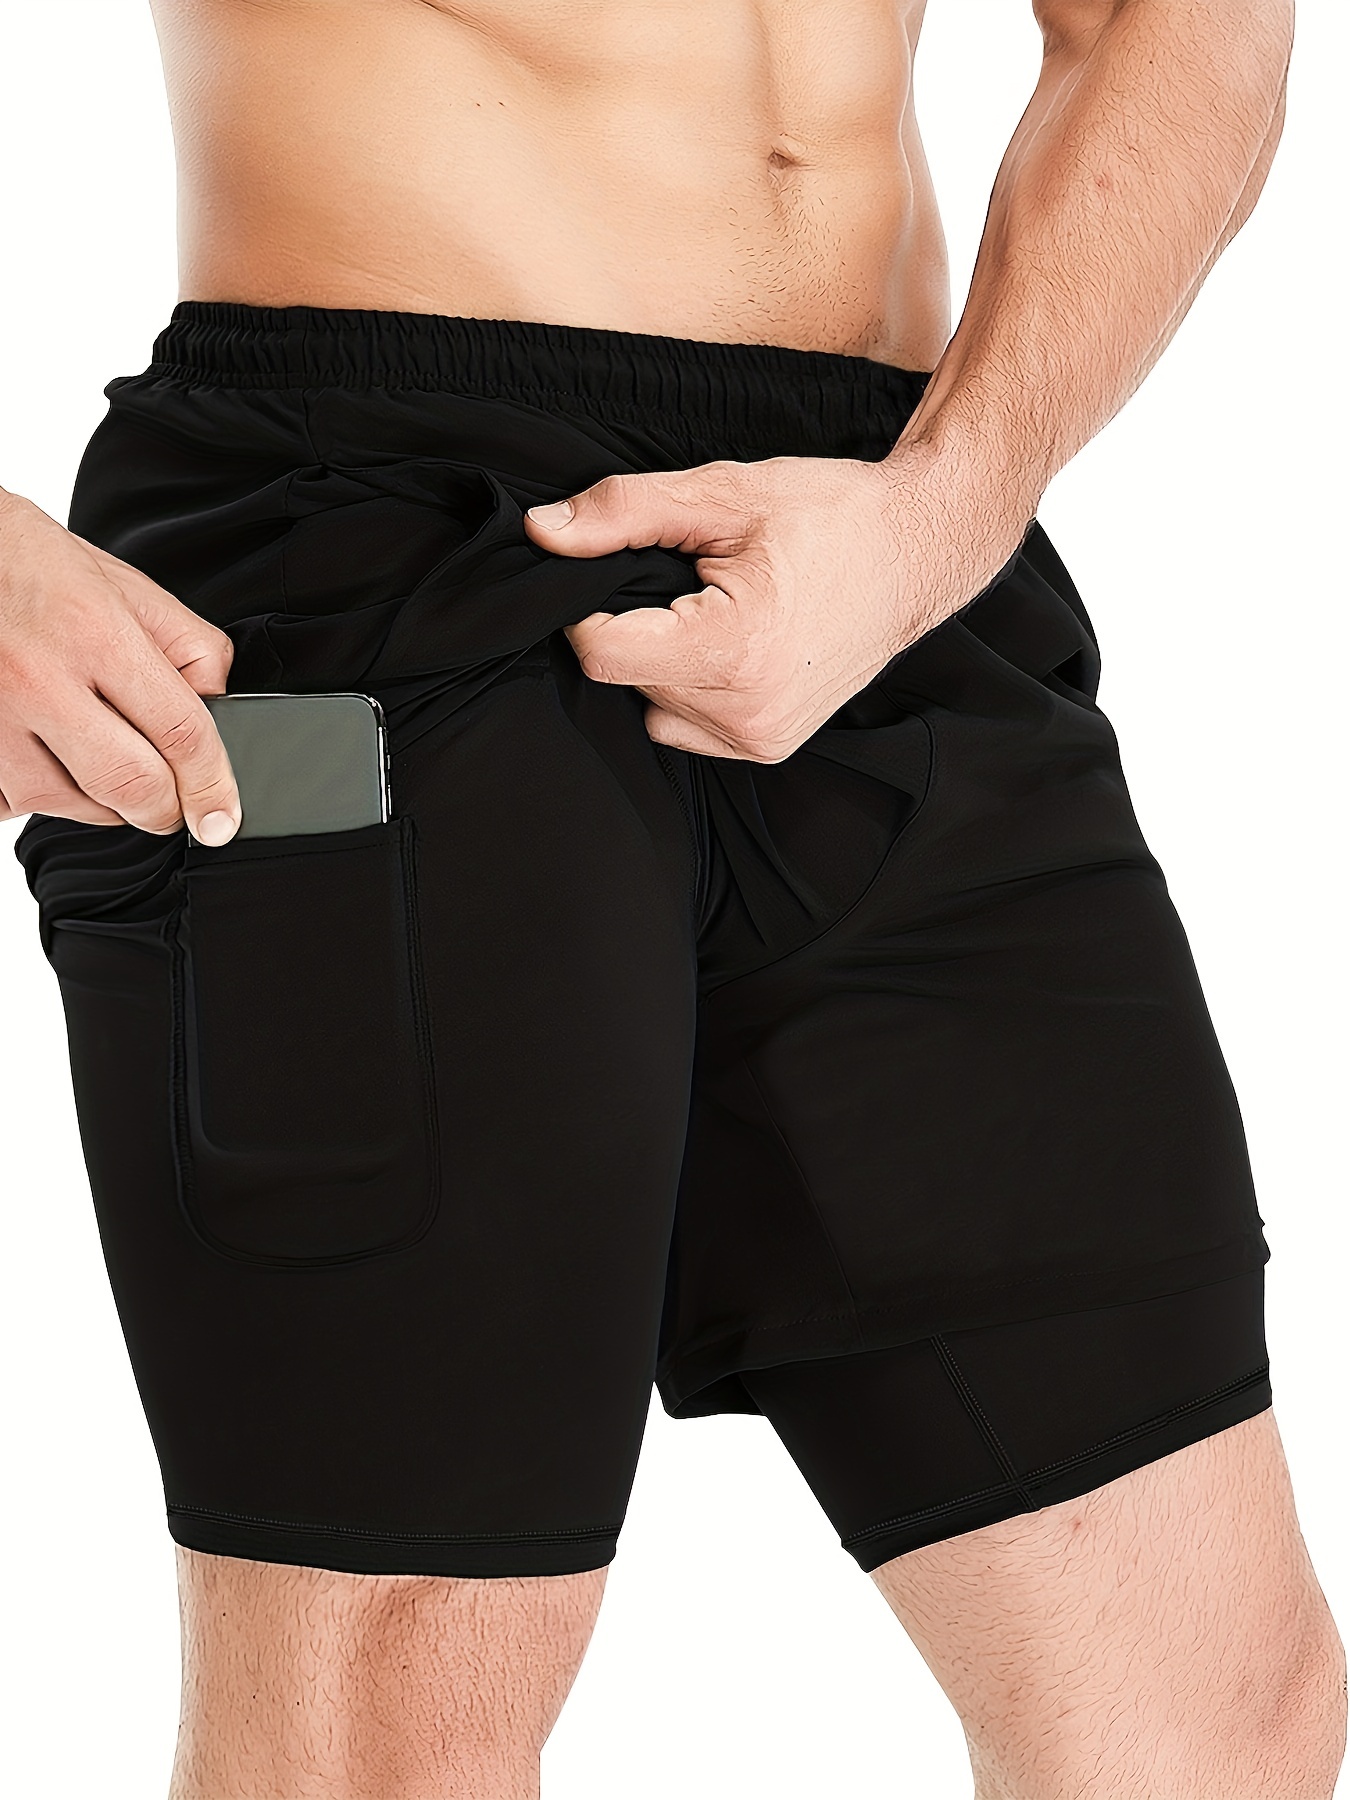 Men's Casual Running Shorts, 2 In 1 Sports Shorts With Phone Pocket  Sweatpants Best Sellers